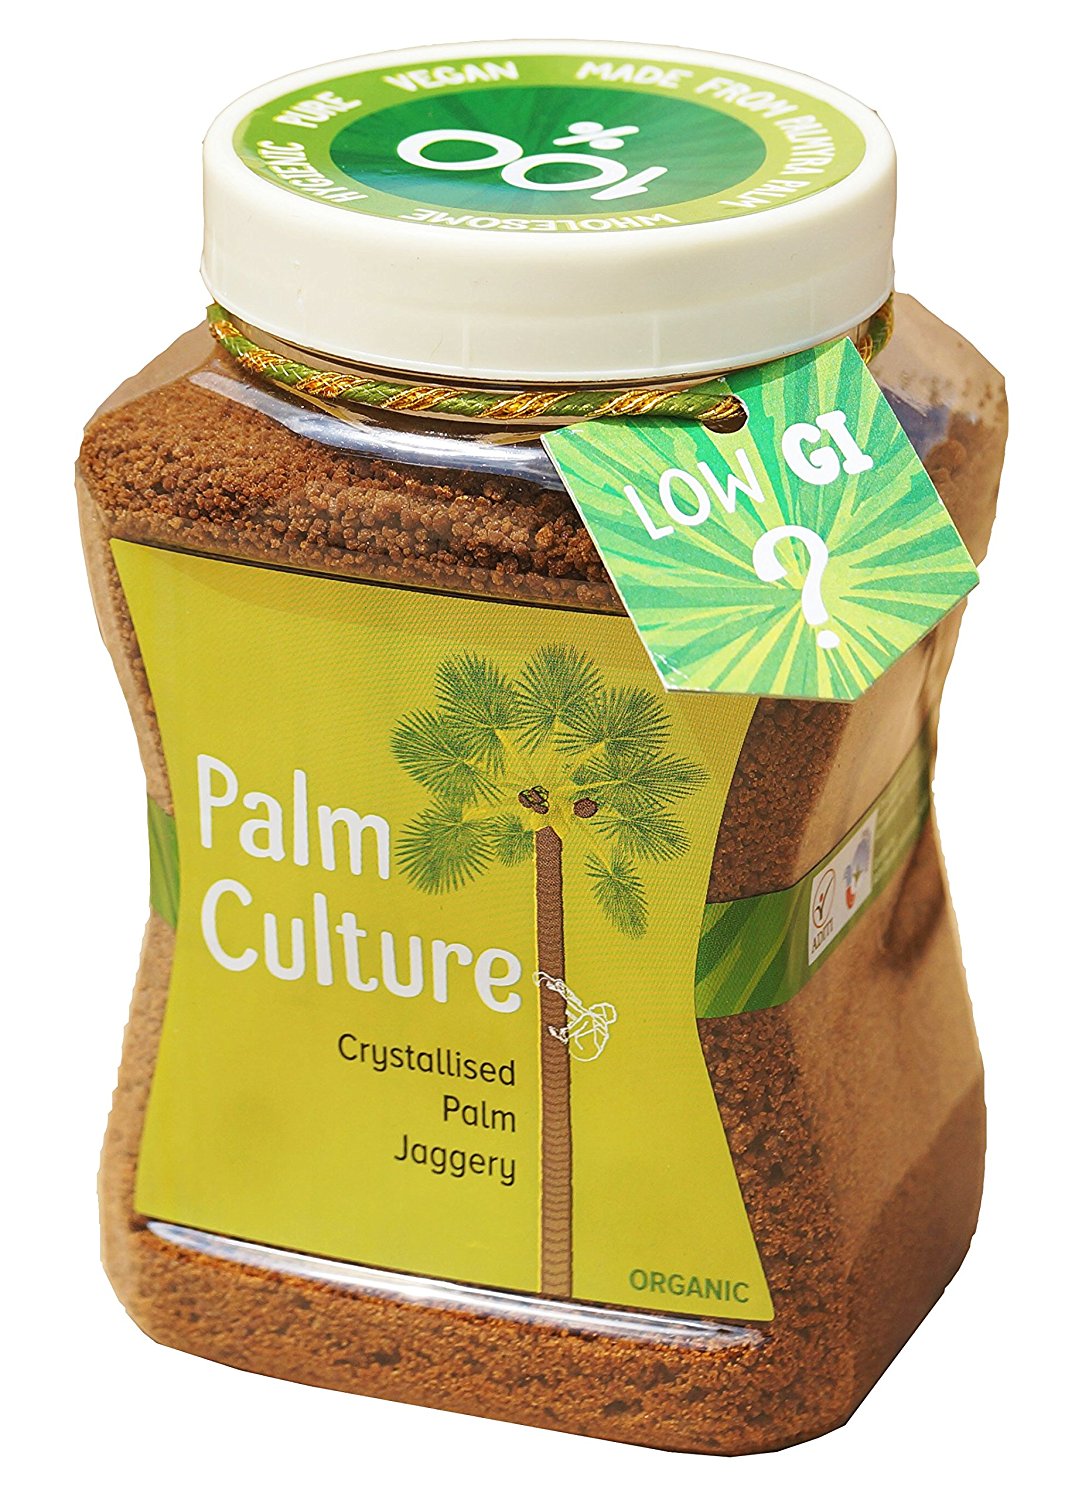 Wellbeing Organic Palm Culture - Crystallised Palm Jaggery, 500G